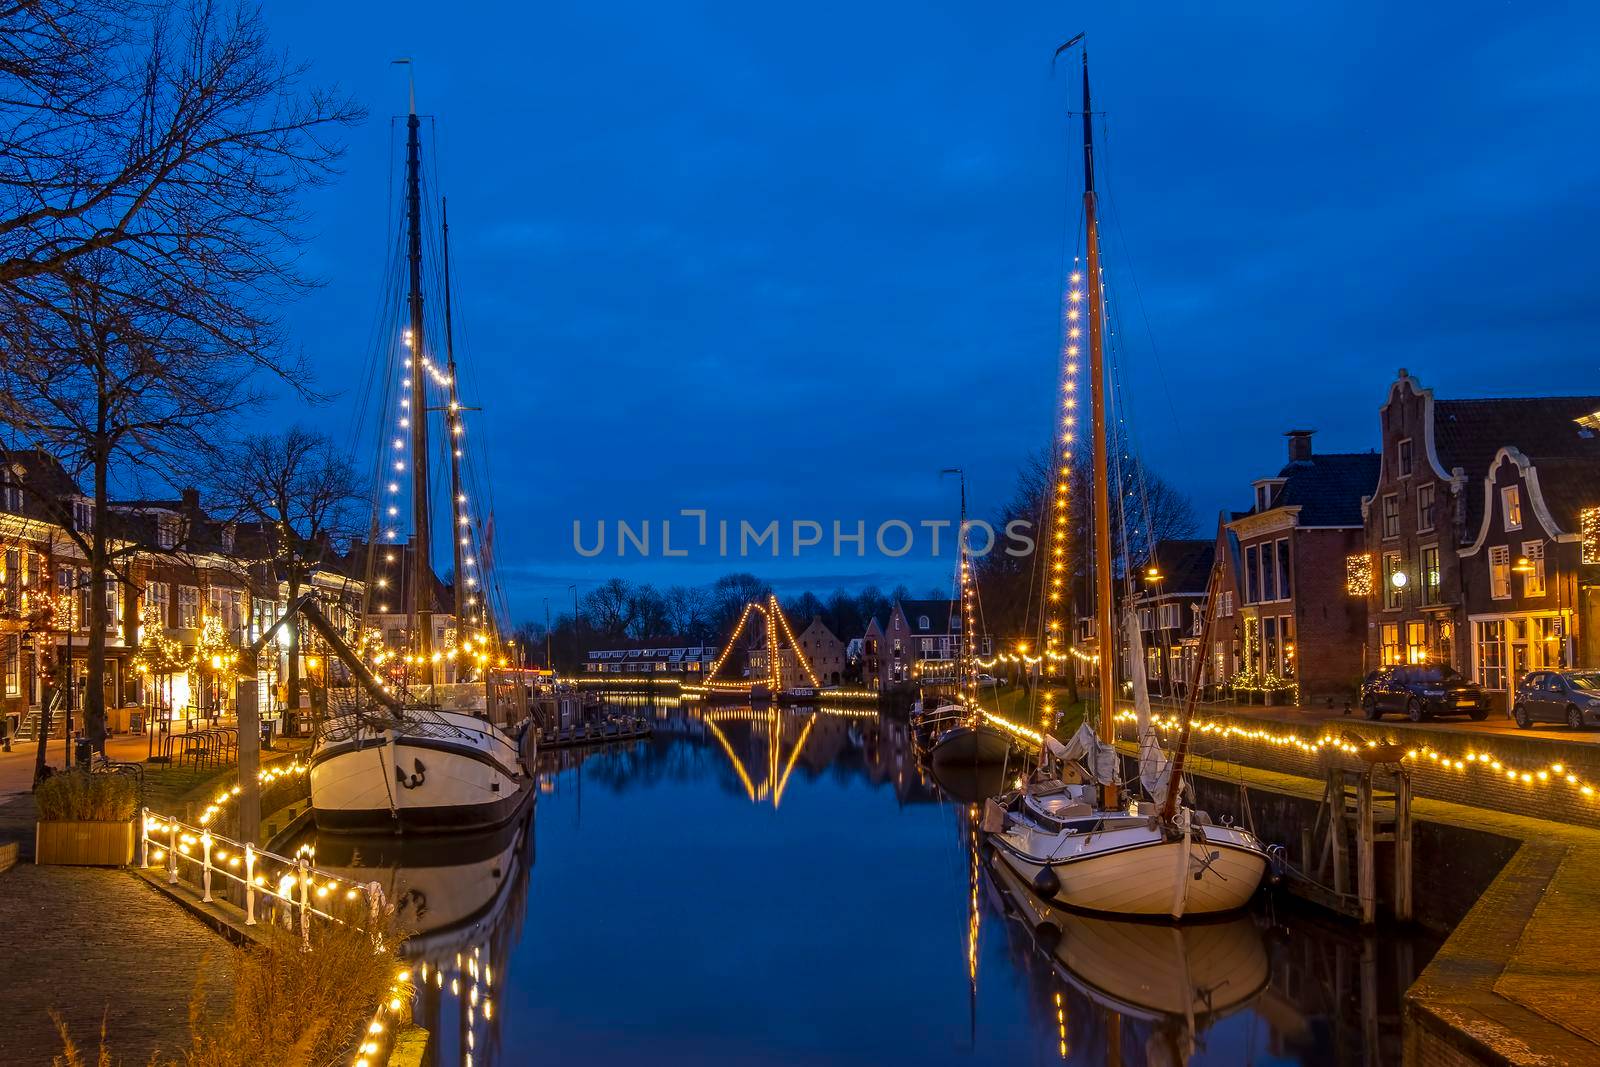 The historical village Dokkum in christmas time in the Netherlands at night by devy